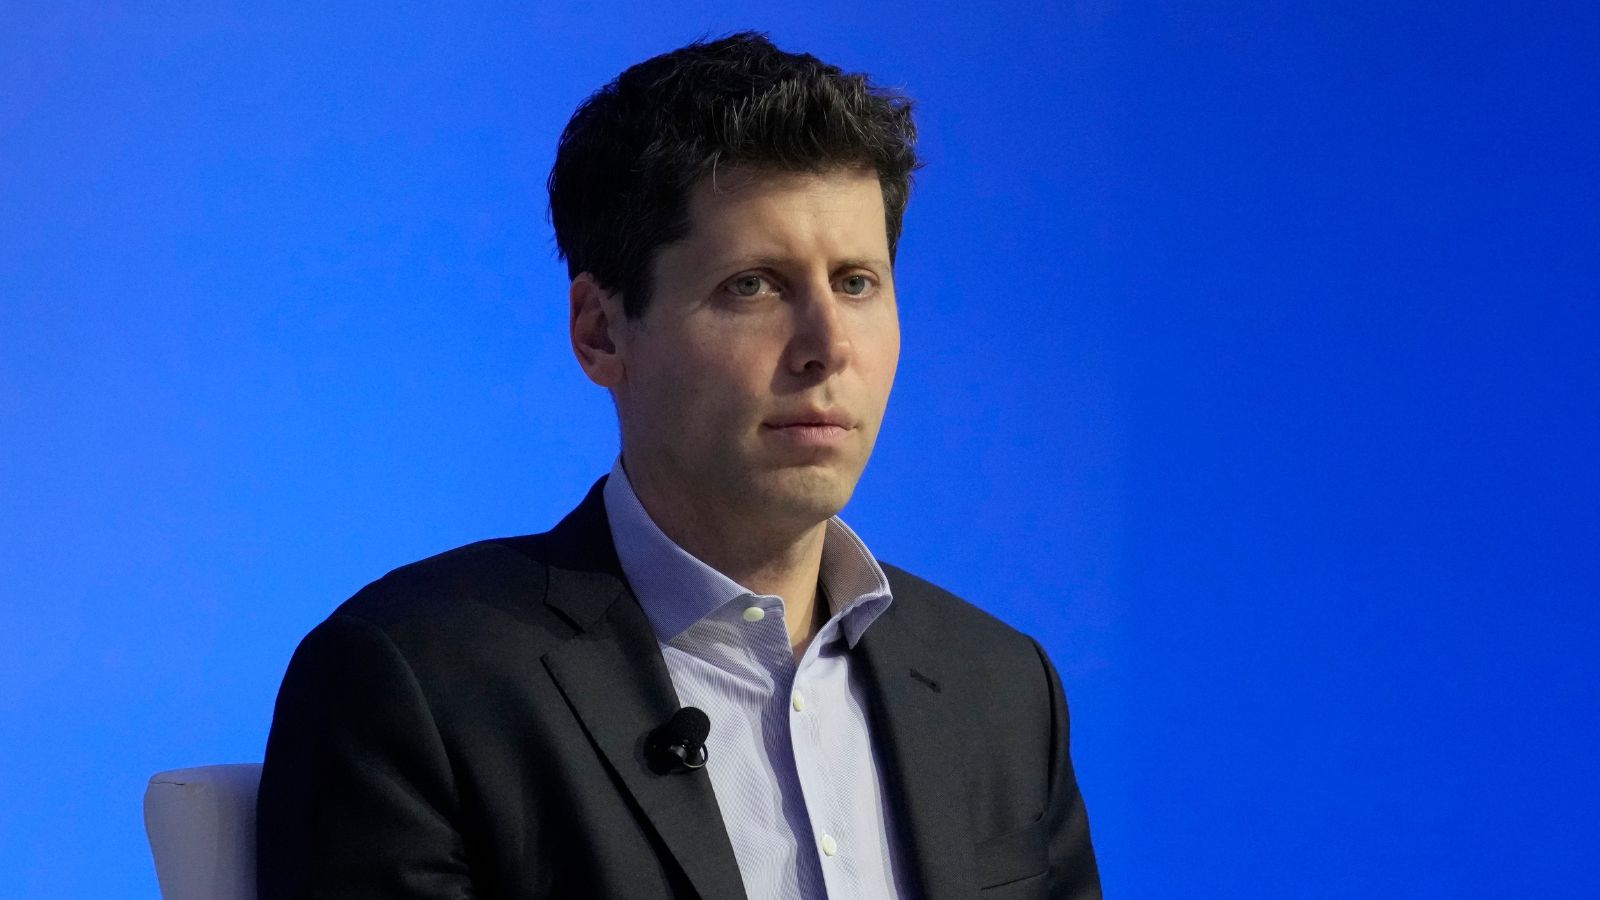 Sam Altman ousted from OpenAI: A look at his big statements as CEO